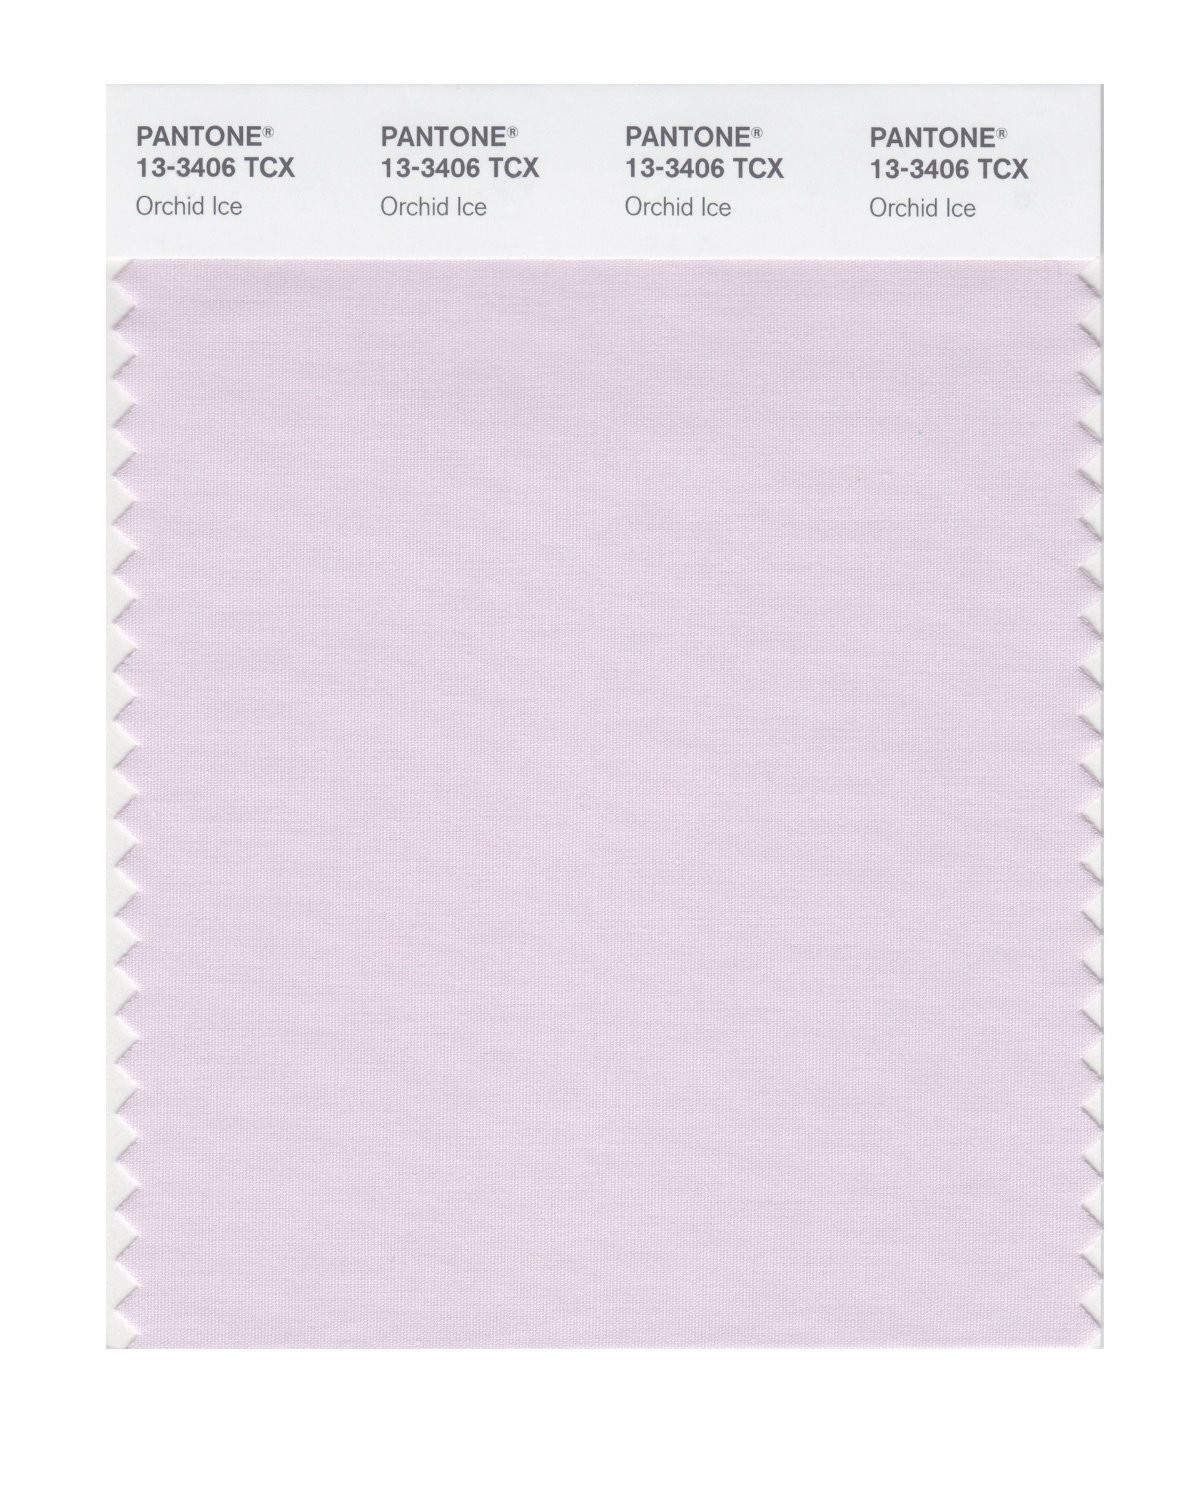 Pantone 13-3406 TCX Swatch Card Orchid Ice